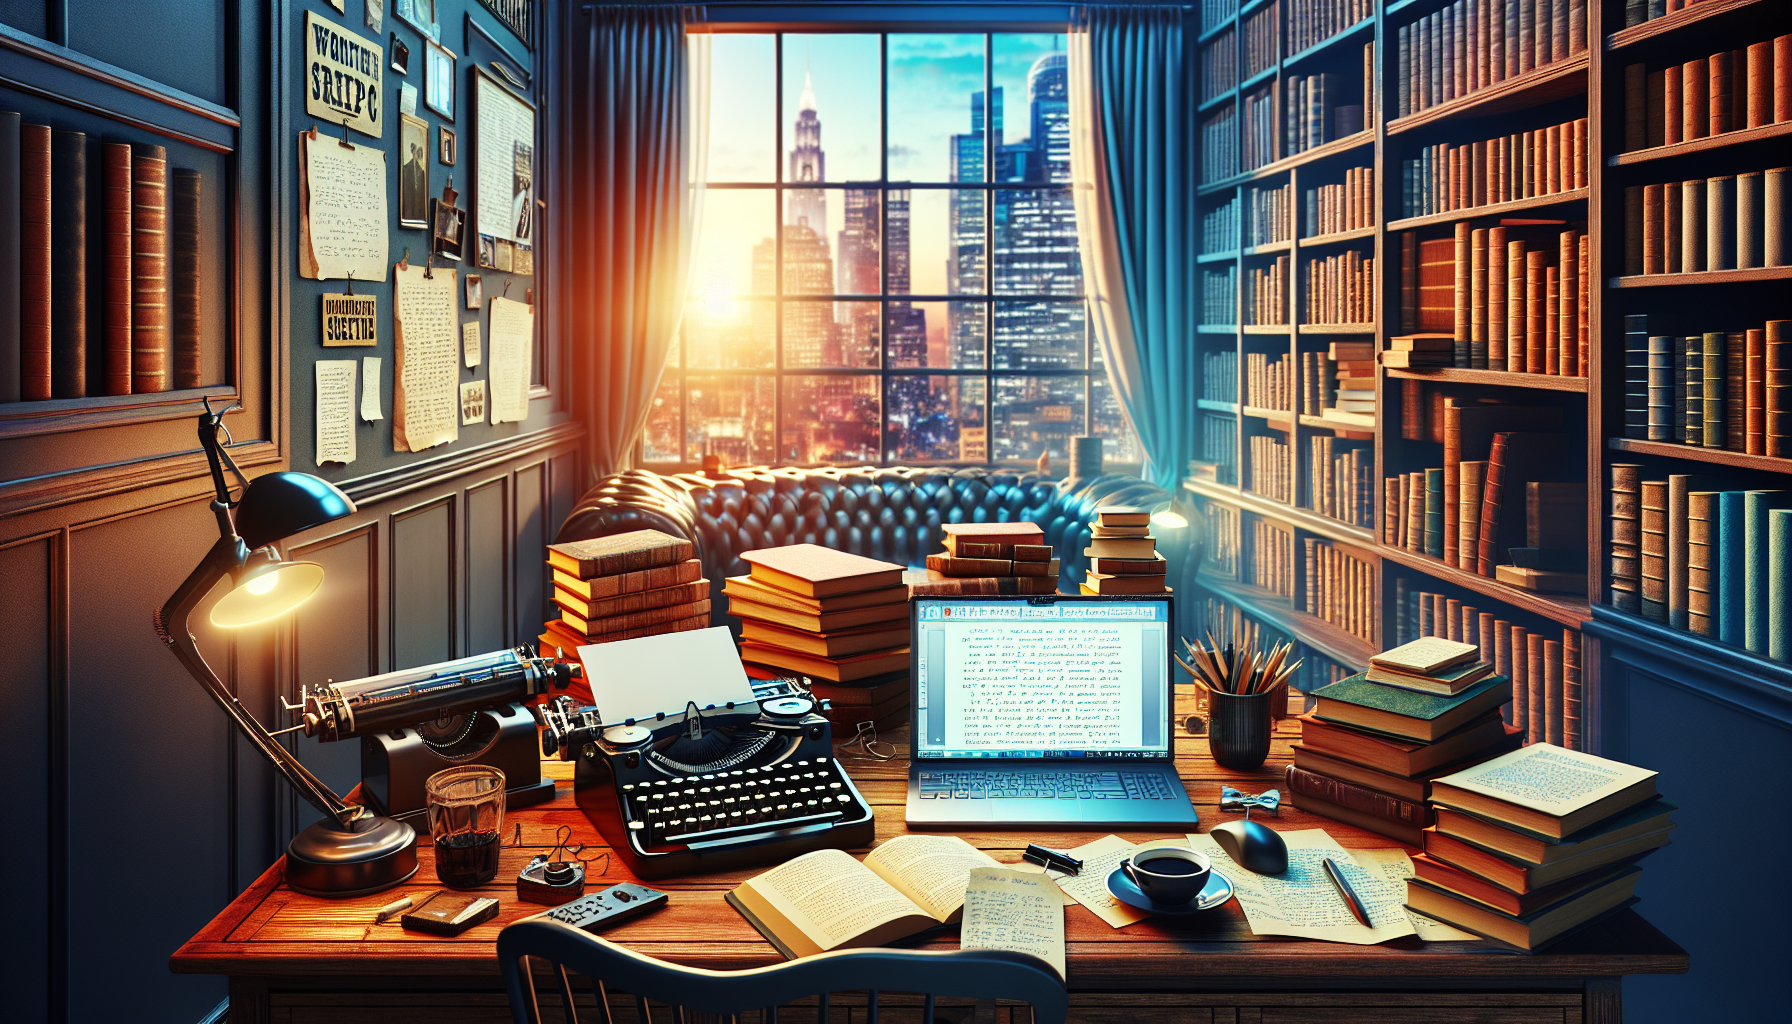 A cozy writer's nook filled with screenwriting books, a vintage typewriter, a modern laptop, scattered scripts, and a storyboard on the wall; soft lighting, a steaming cup of coffee on the desk, and a